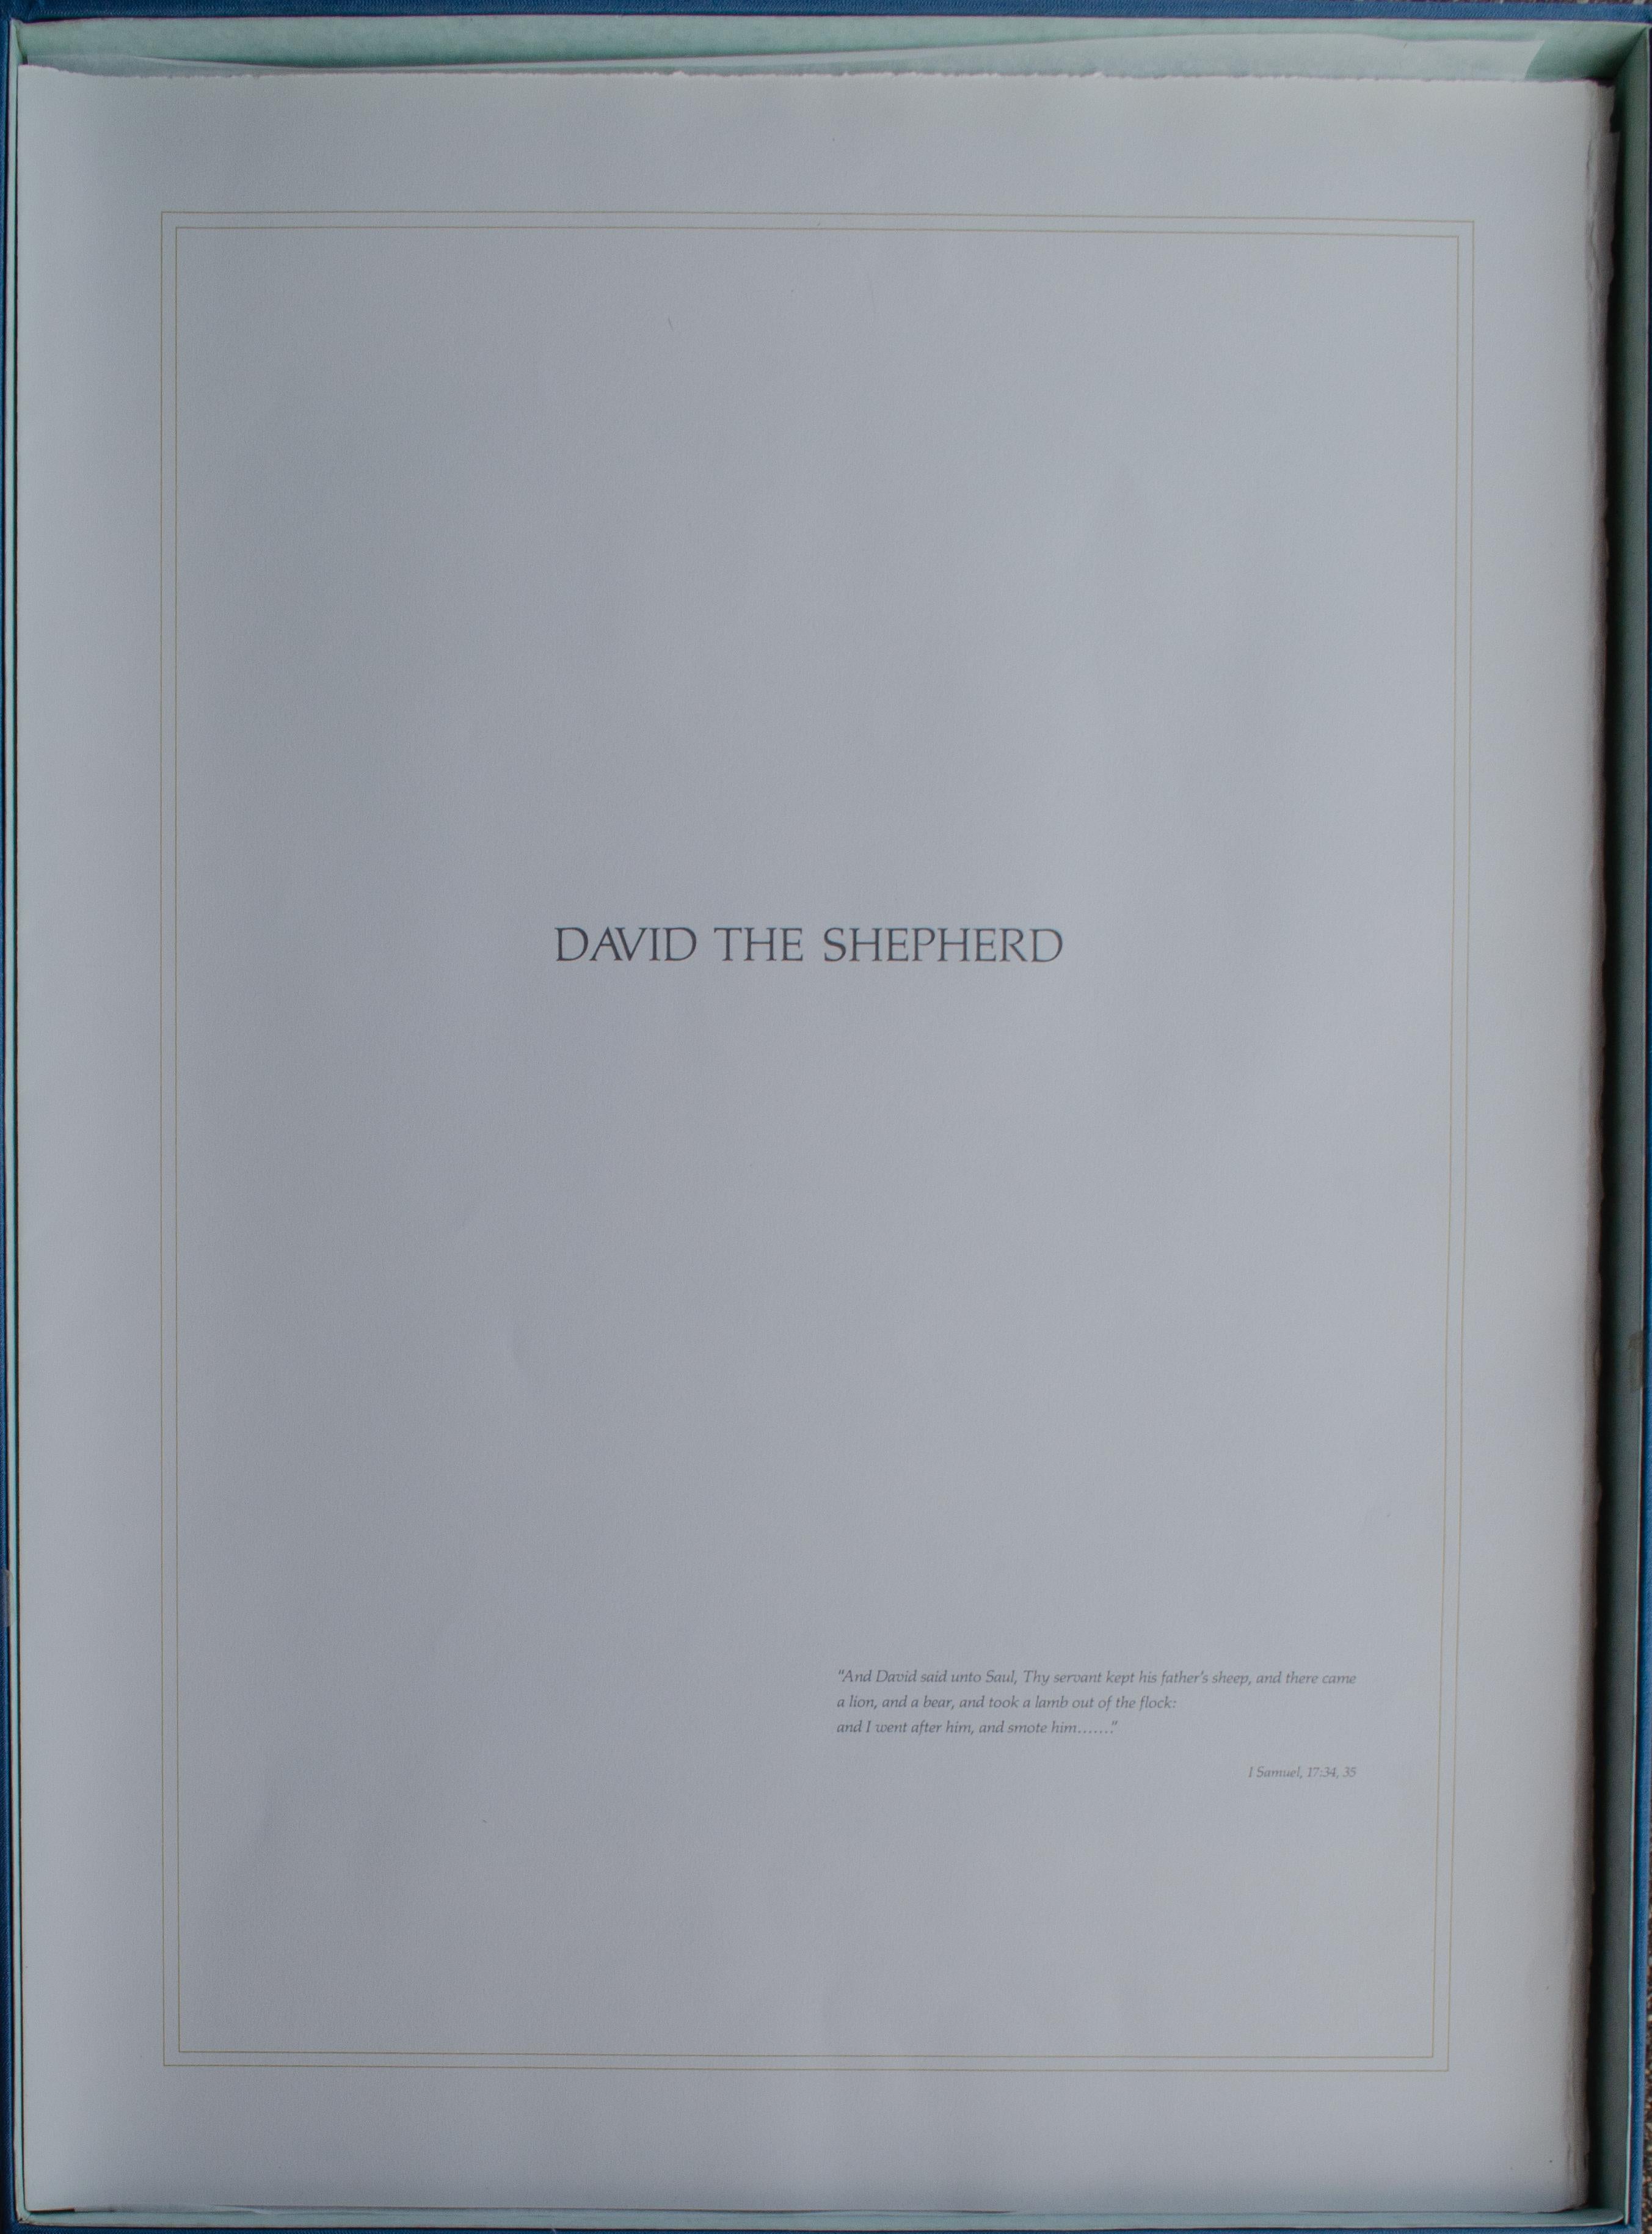 Two Fine Prints from the David Suite by Edna Hibel, 1978 For Sale 2